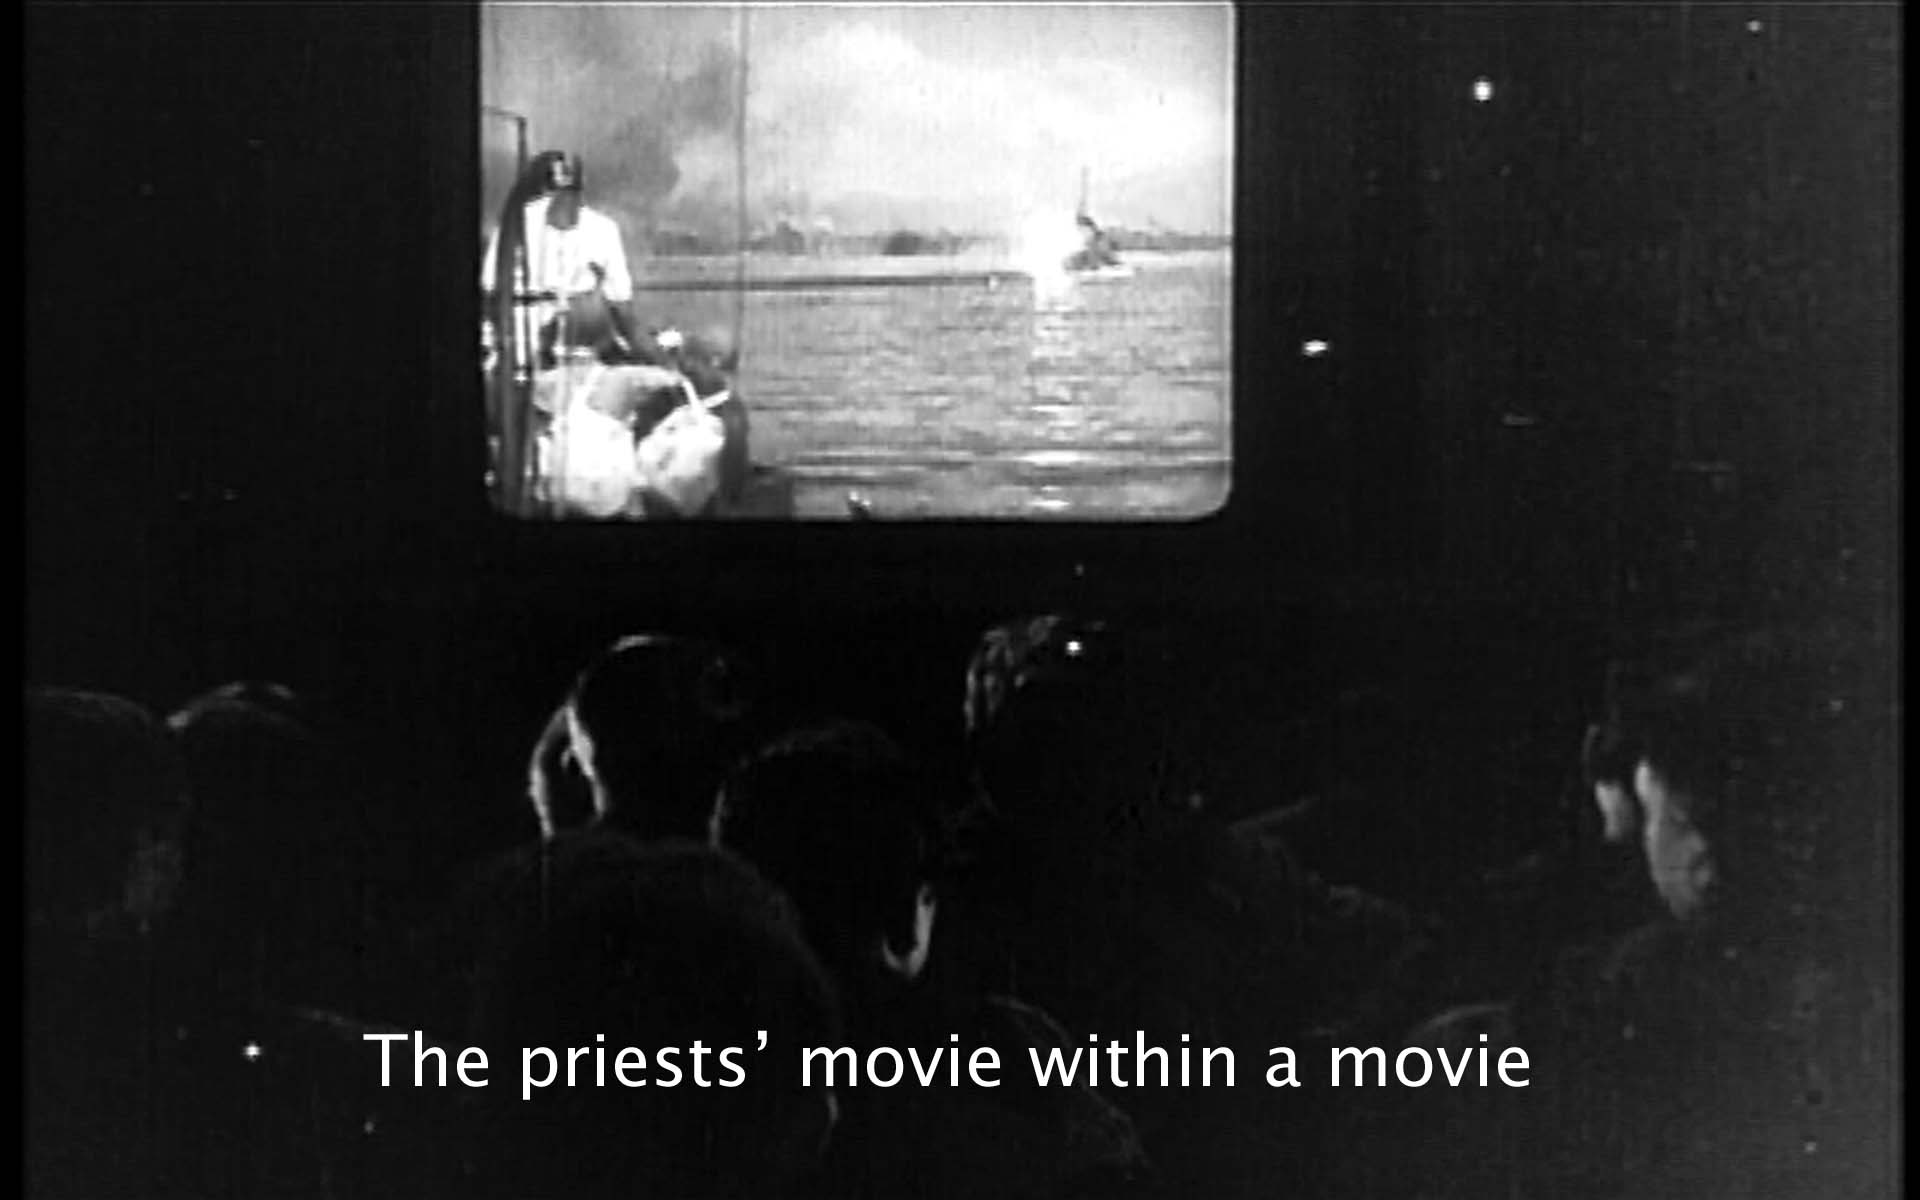 The priests' movie within a movie